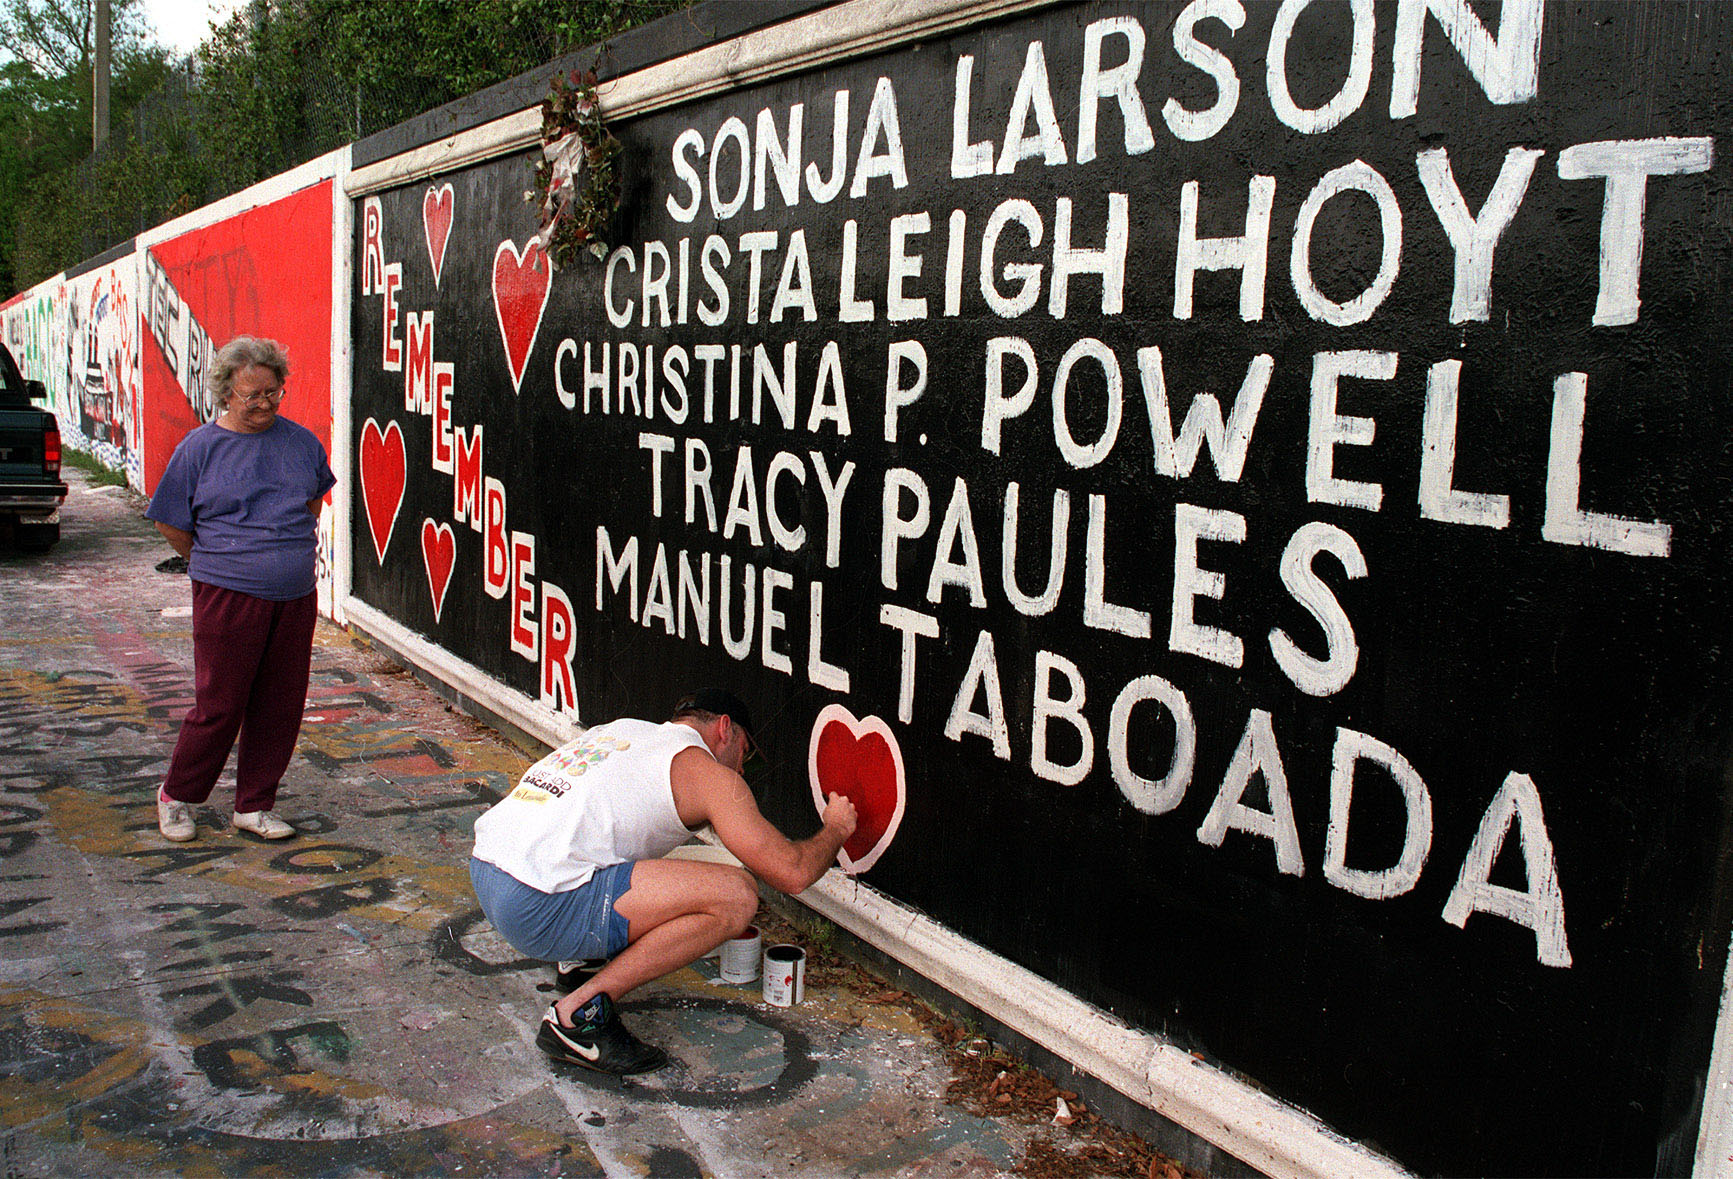 PHOTO: Tony Mekeel repaints one of the hearts on the 34th Street Wall memorial as Ann Garren, the mother of slain student Christa Hoyt, watches. Mekeel was a neighbor of one of the slain students, Manuel Taboada, during the ordeal in 1990.